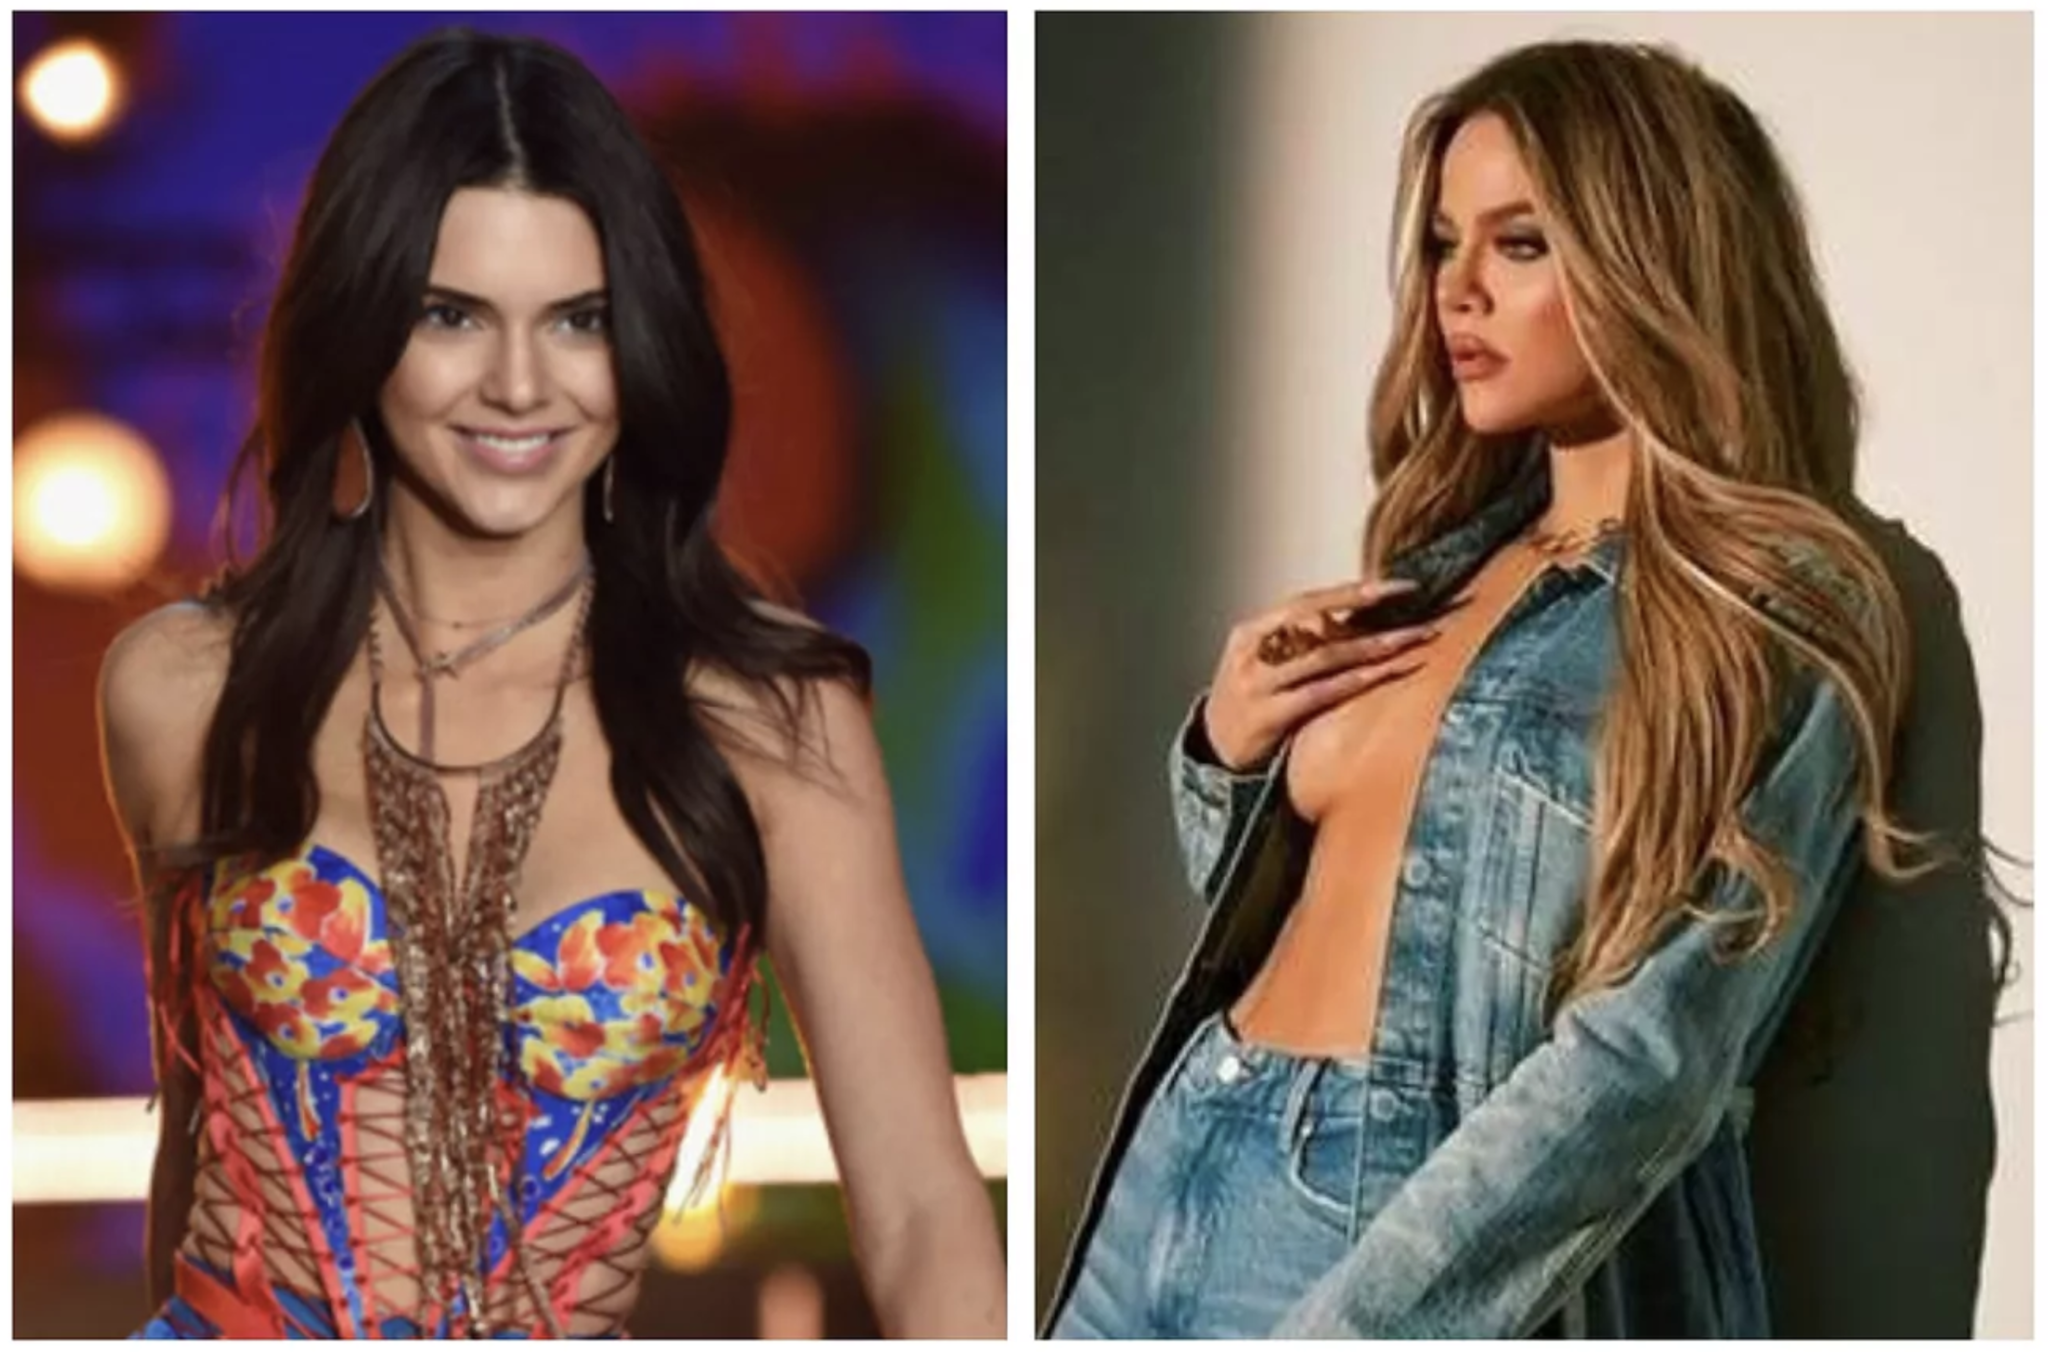 Kendall Jenner trolled by Khloe Kardashian over her her bikini pics: Shut up, we know youre amazing